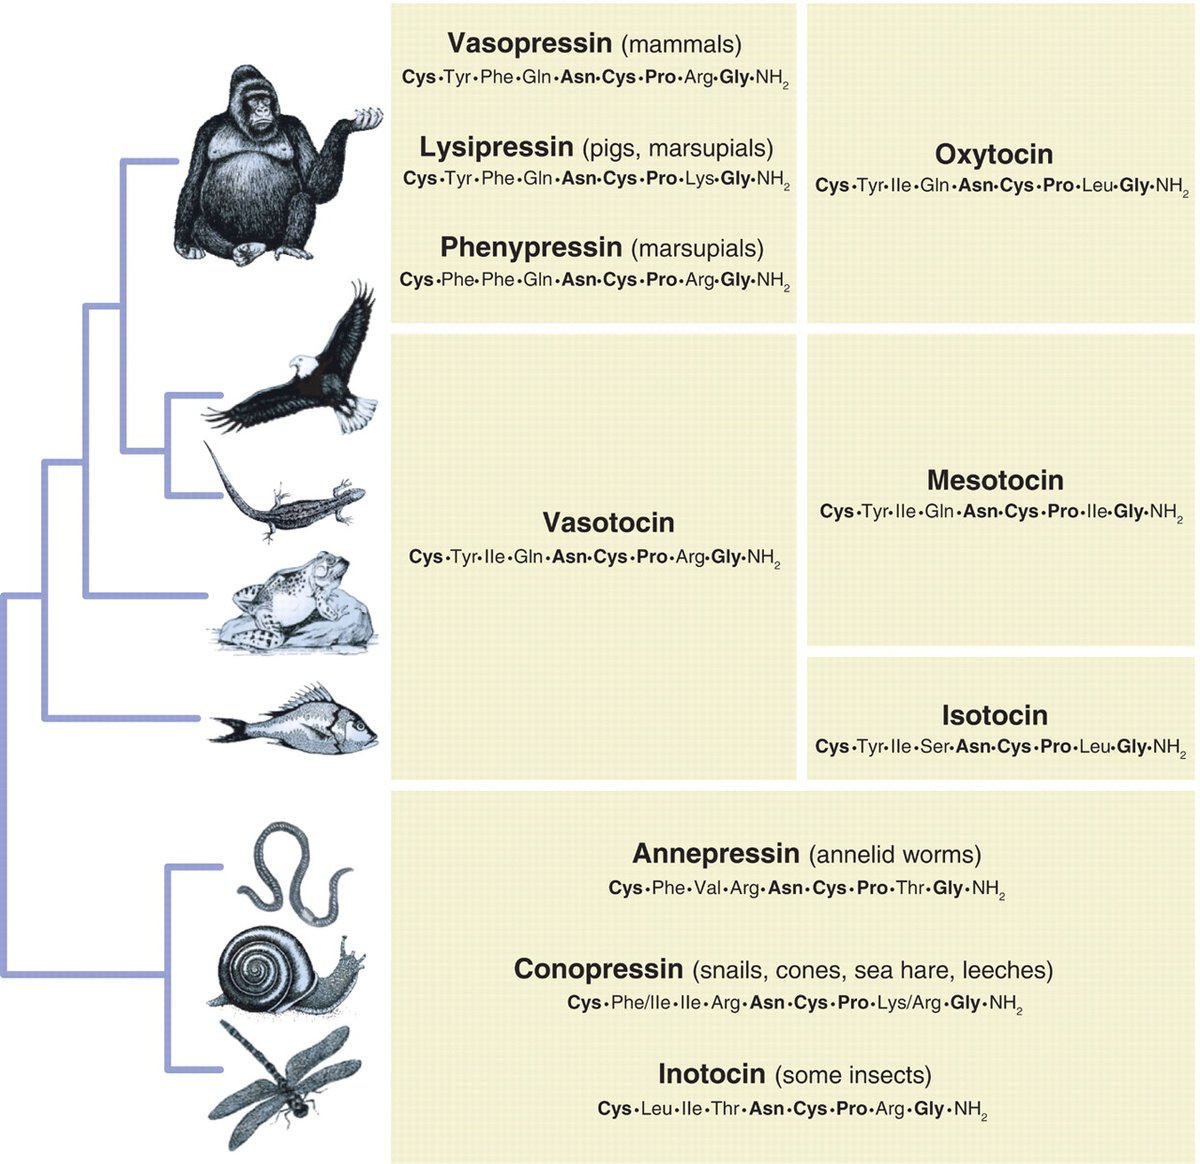 Nope: it’s oxytocin.Oxytocin & vasopressin are evolutionary cousins located side-by-side on human chromosome 20. Invertebrates have one hybrid copy. Tandem duplication in the common jawed vertebrate ancestor gave rise to our two gene copies.Image from  https://science.sciencemag.org/content/322/5903/900.